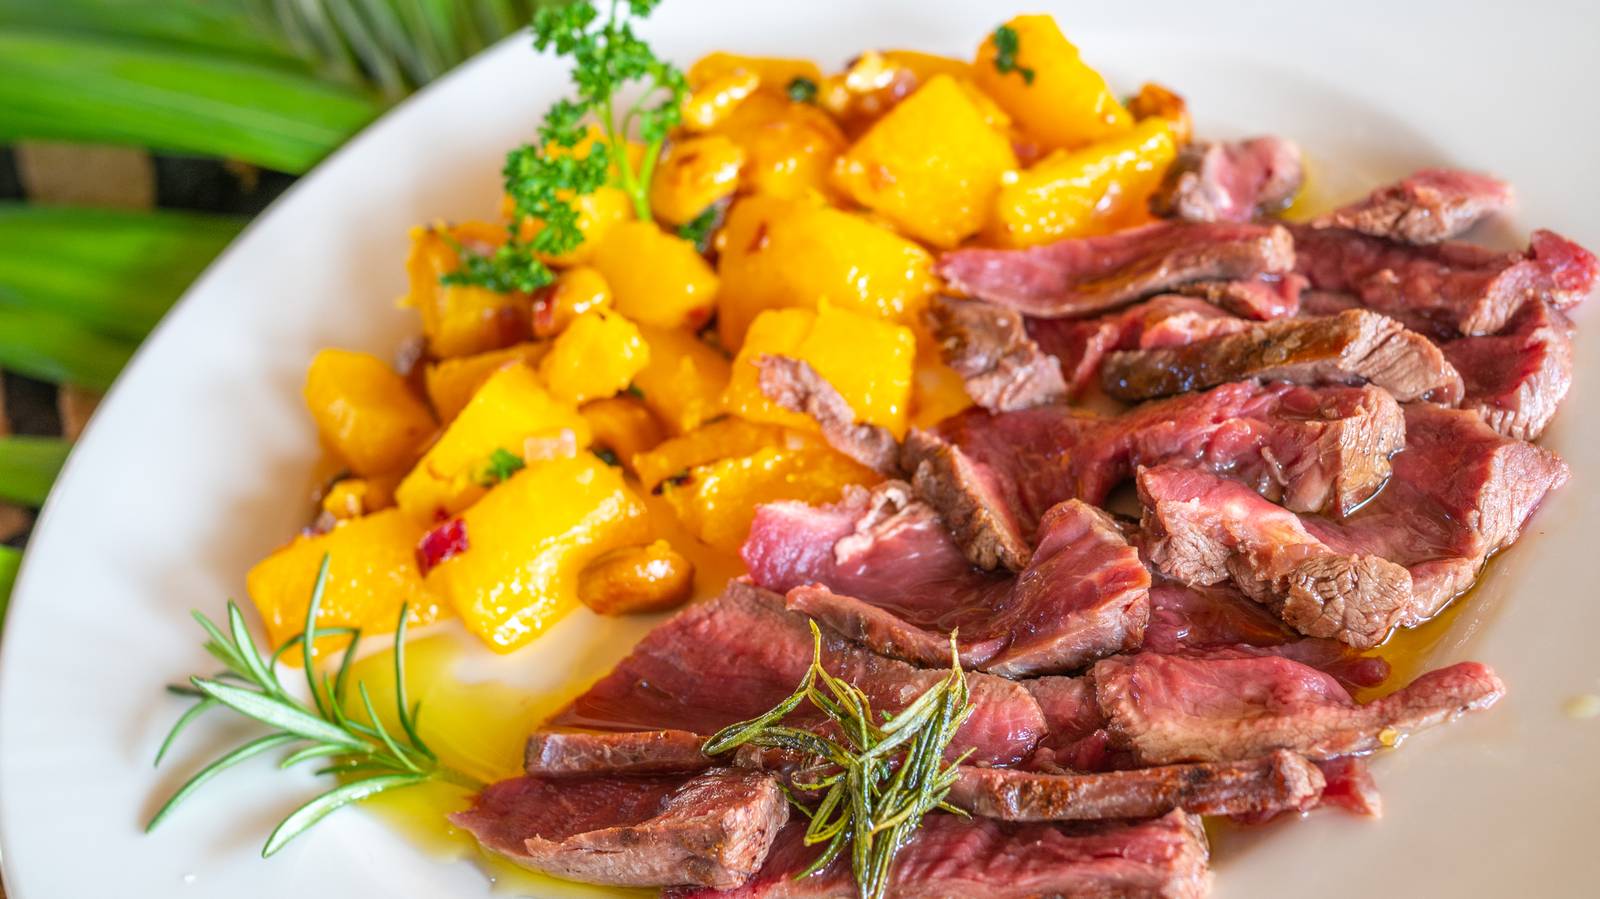 Rosemary Steak with Sauteed Butternut Squash